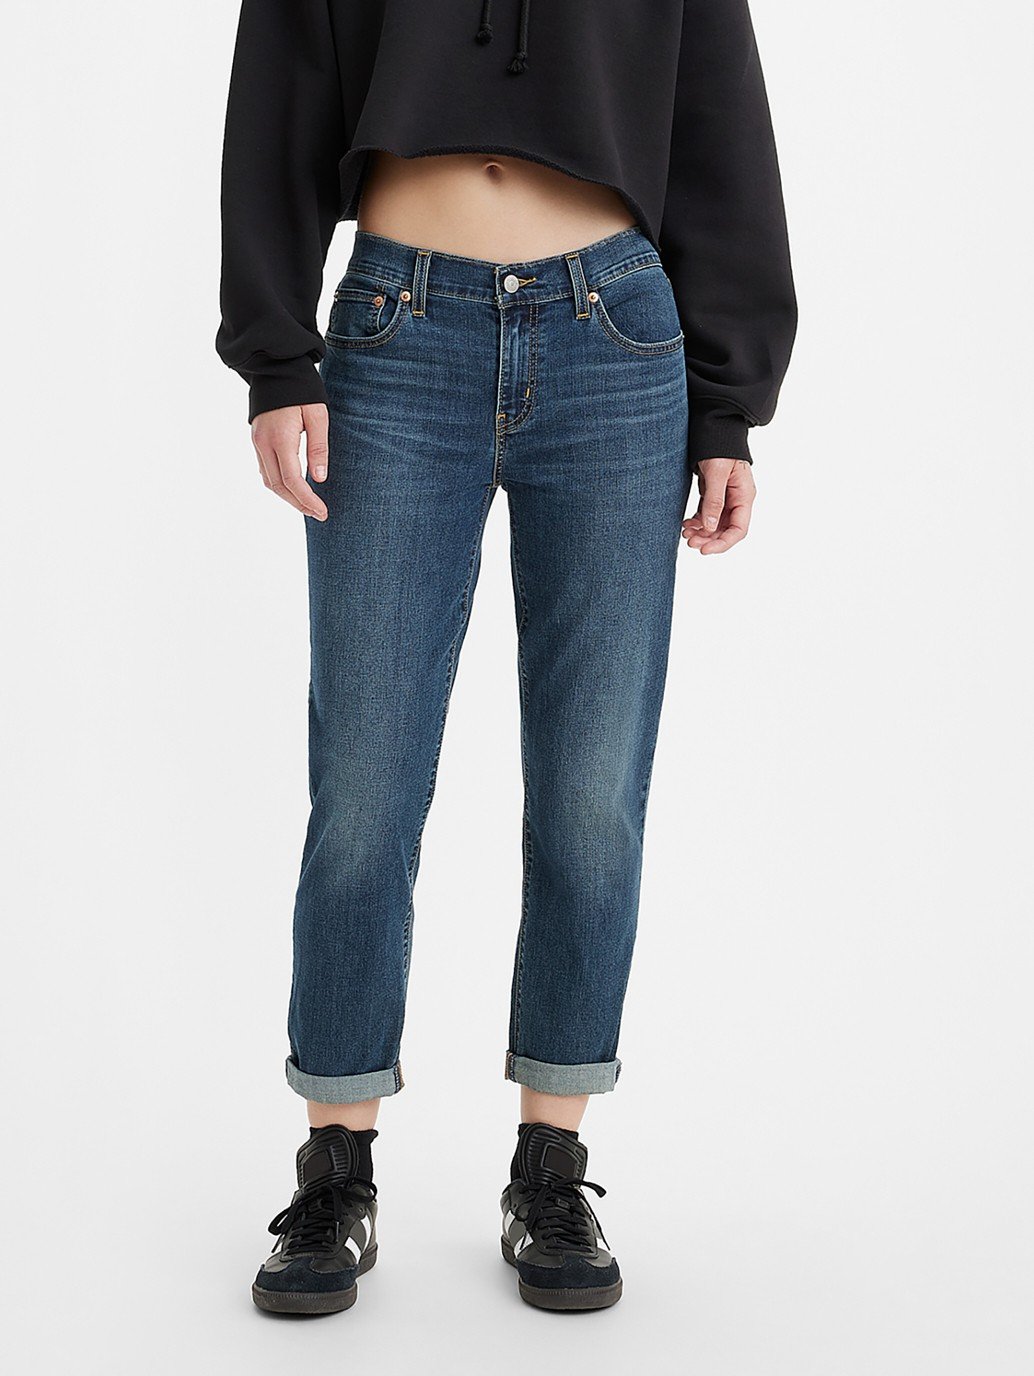 Women's Mid Rise Relaxed Fit Stretch Jeans-nttc.com.vn